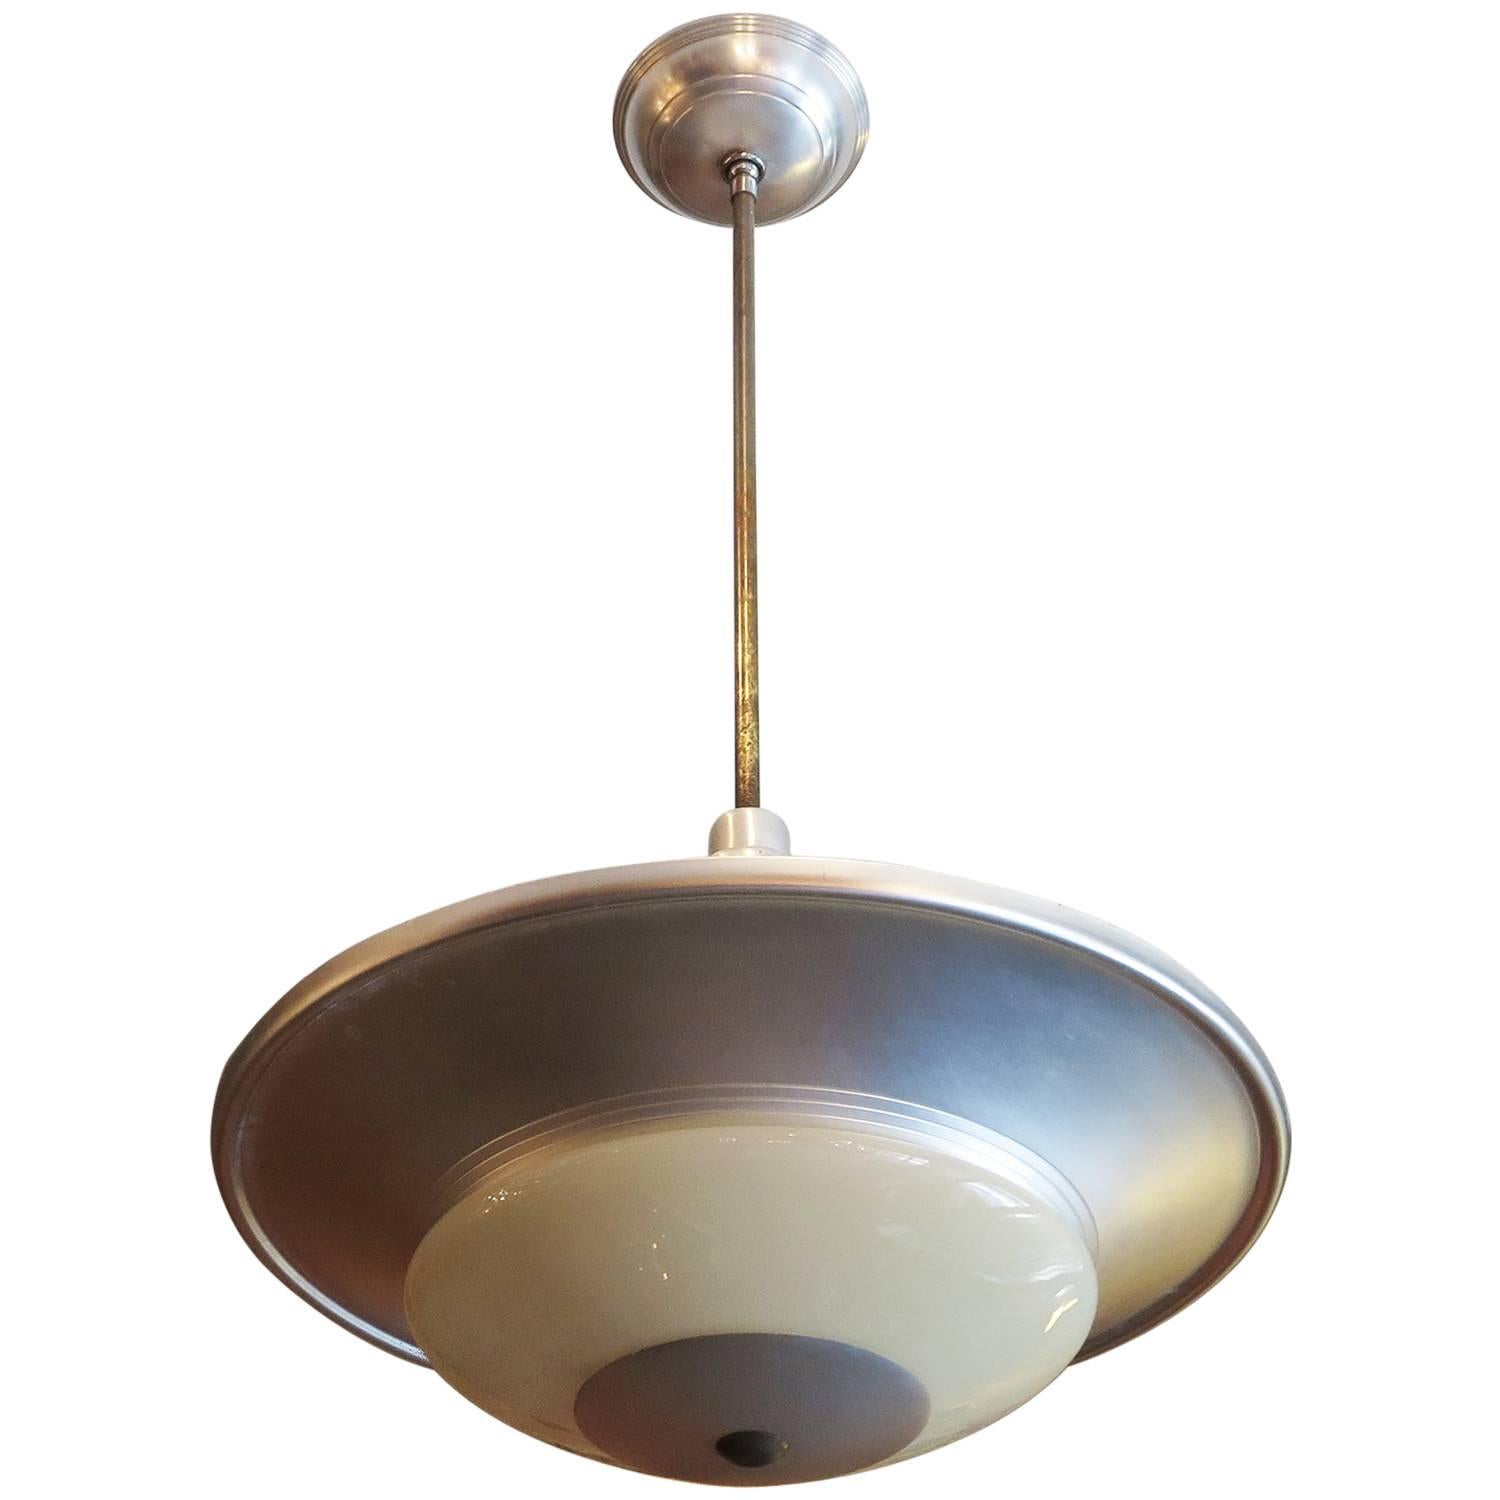 Art Deco "Flying Saucer" Hanging Lamps